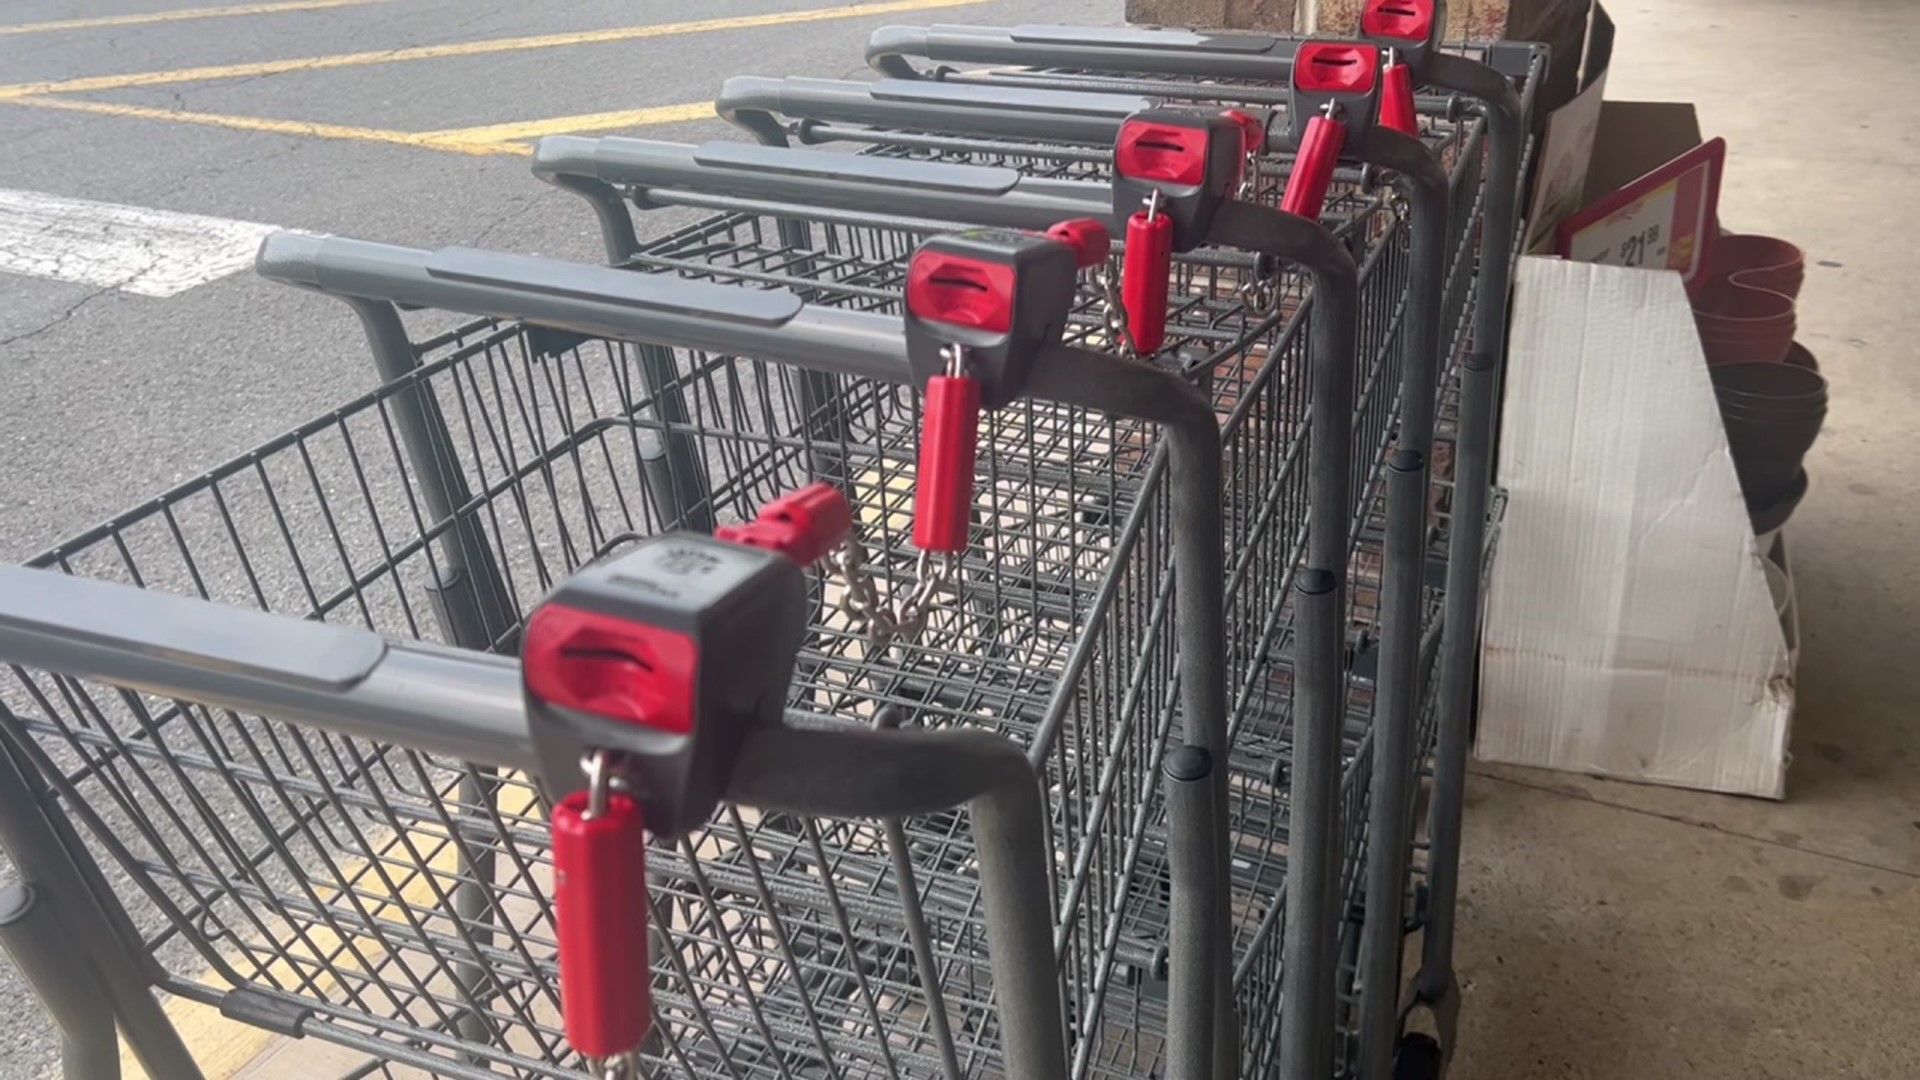 Weis shoppers will need to have change to be able to use a cart at select locations across Pennsylvania.